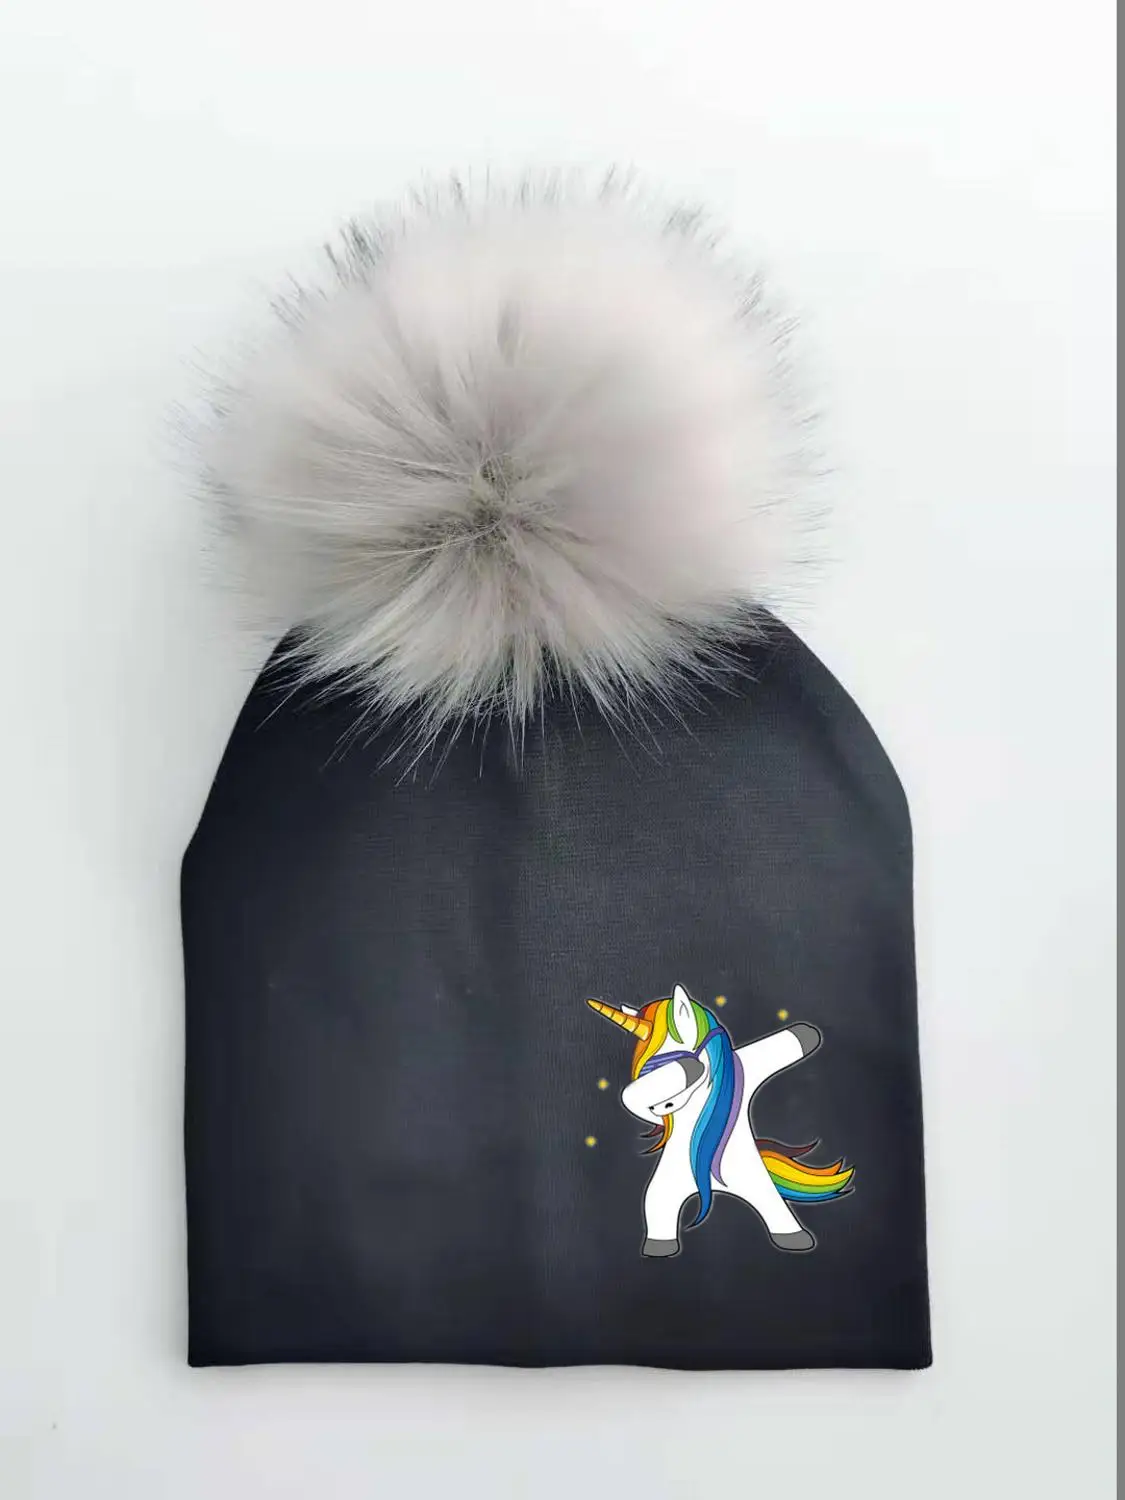 

2018 spring winter children baby unicorn cotton colorful hat cap beanie skullies for girls and boys faux fur pom pom hat props